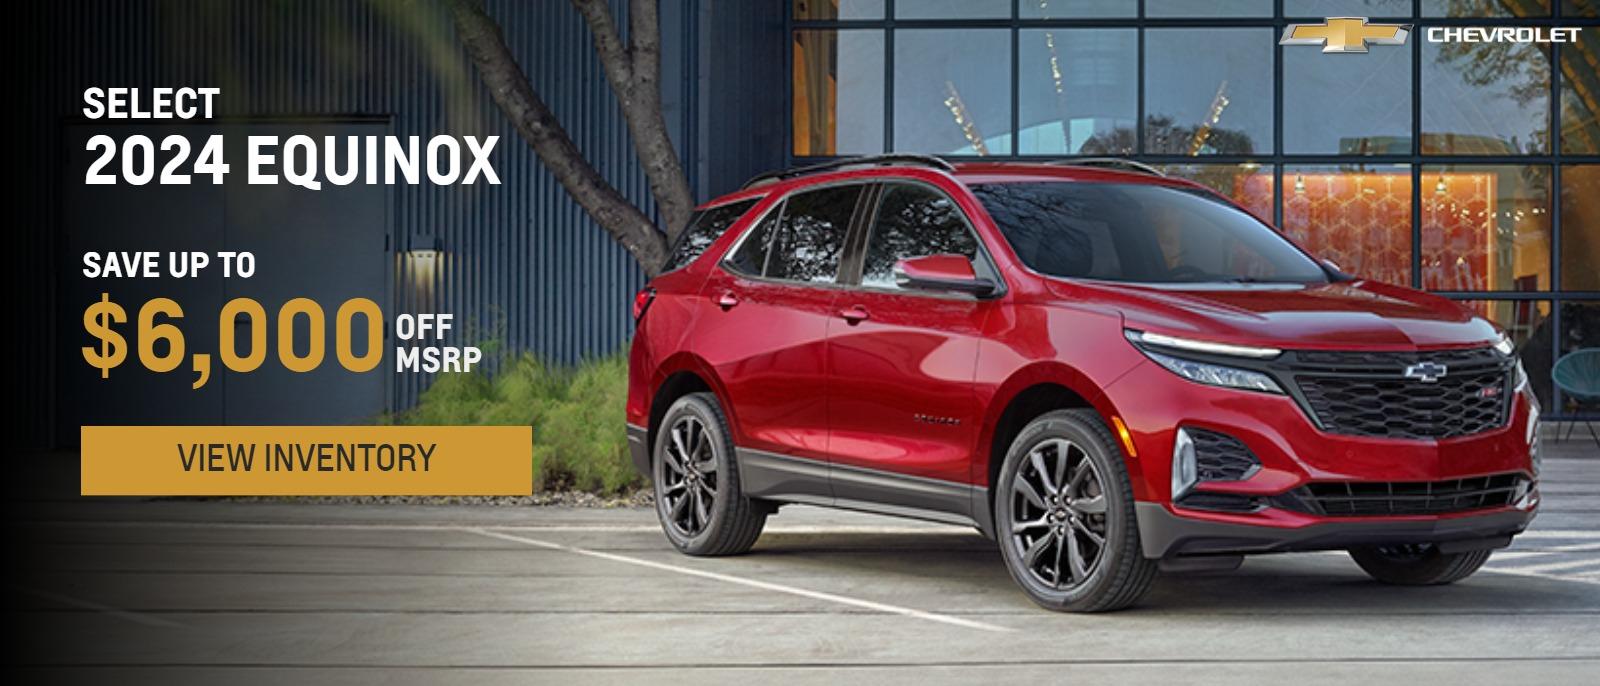 Select 2024 Equinox $4,000 off MSRP plus additional incentives available for qualified customers!